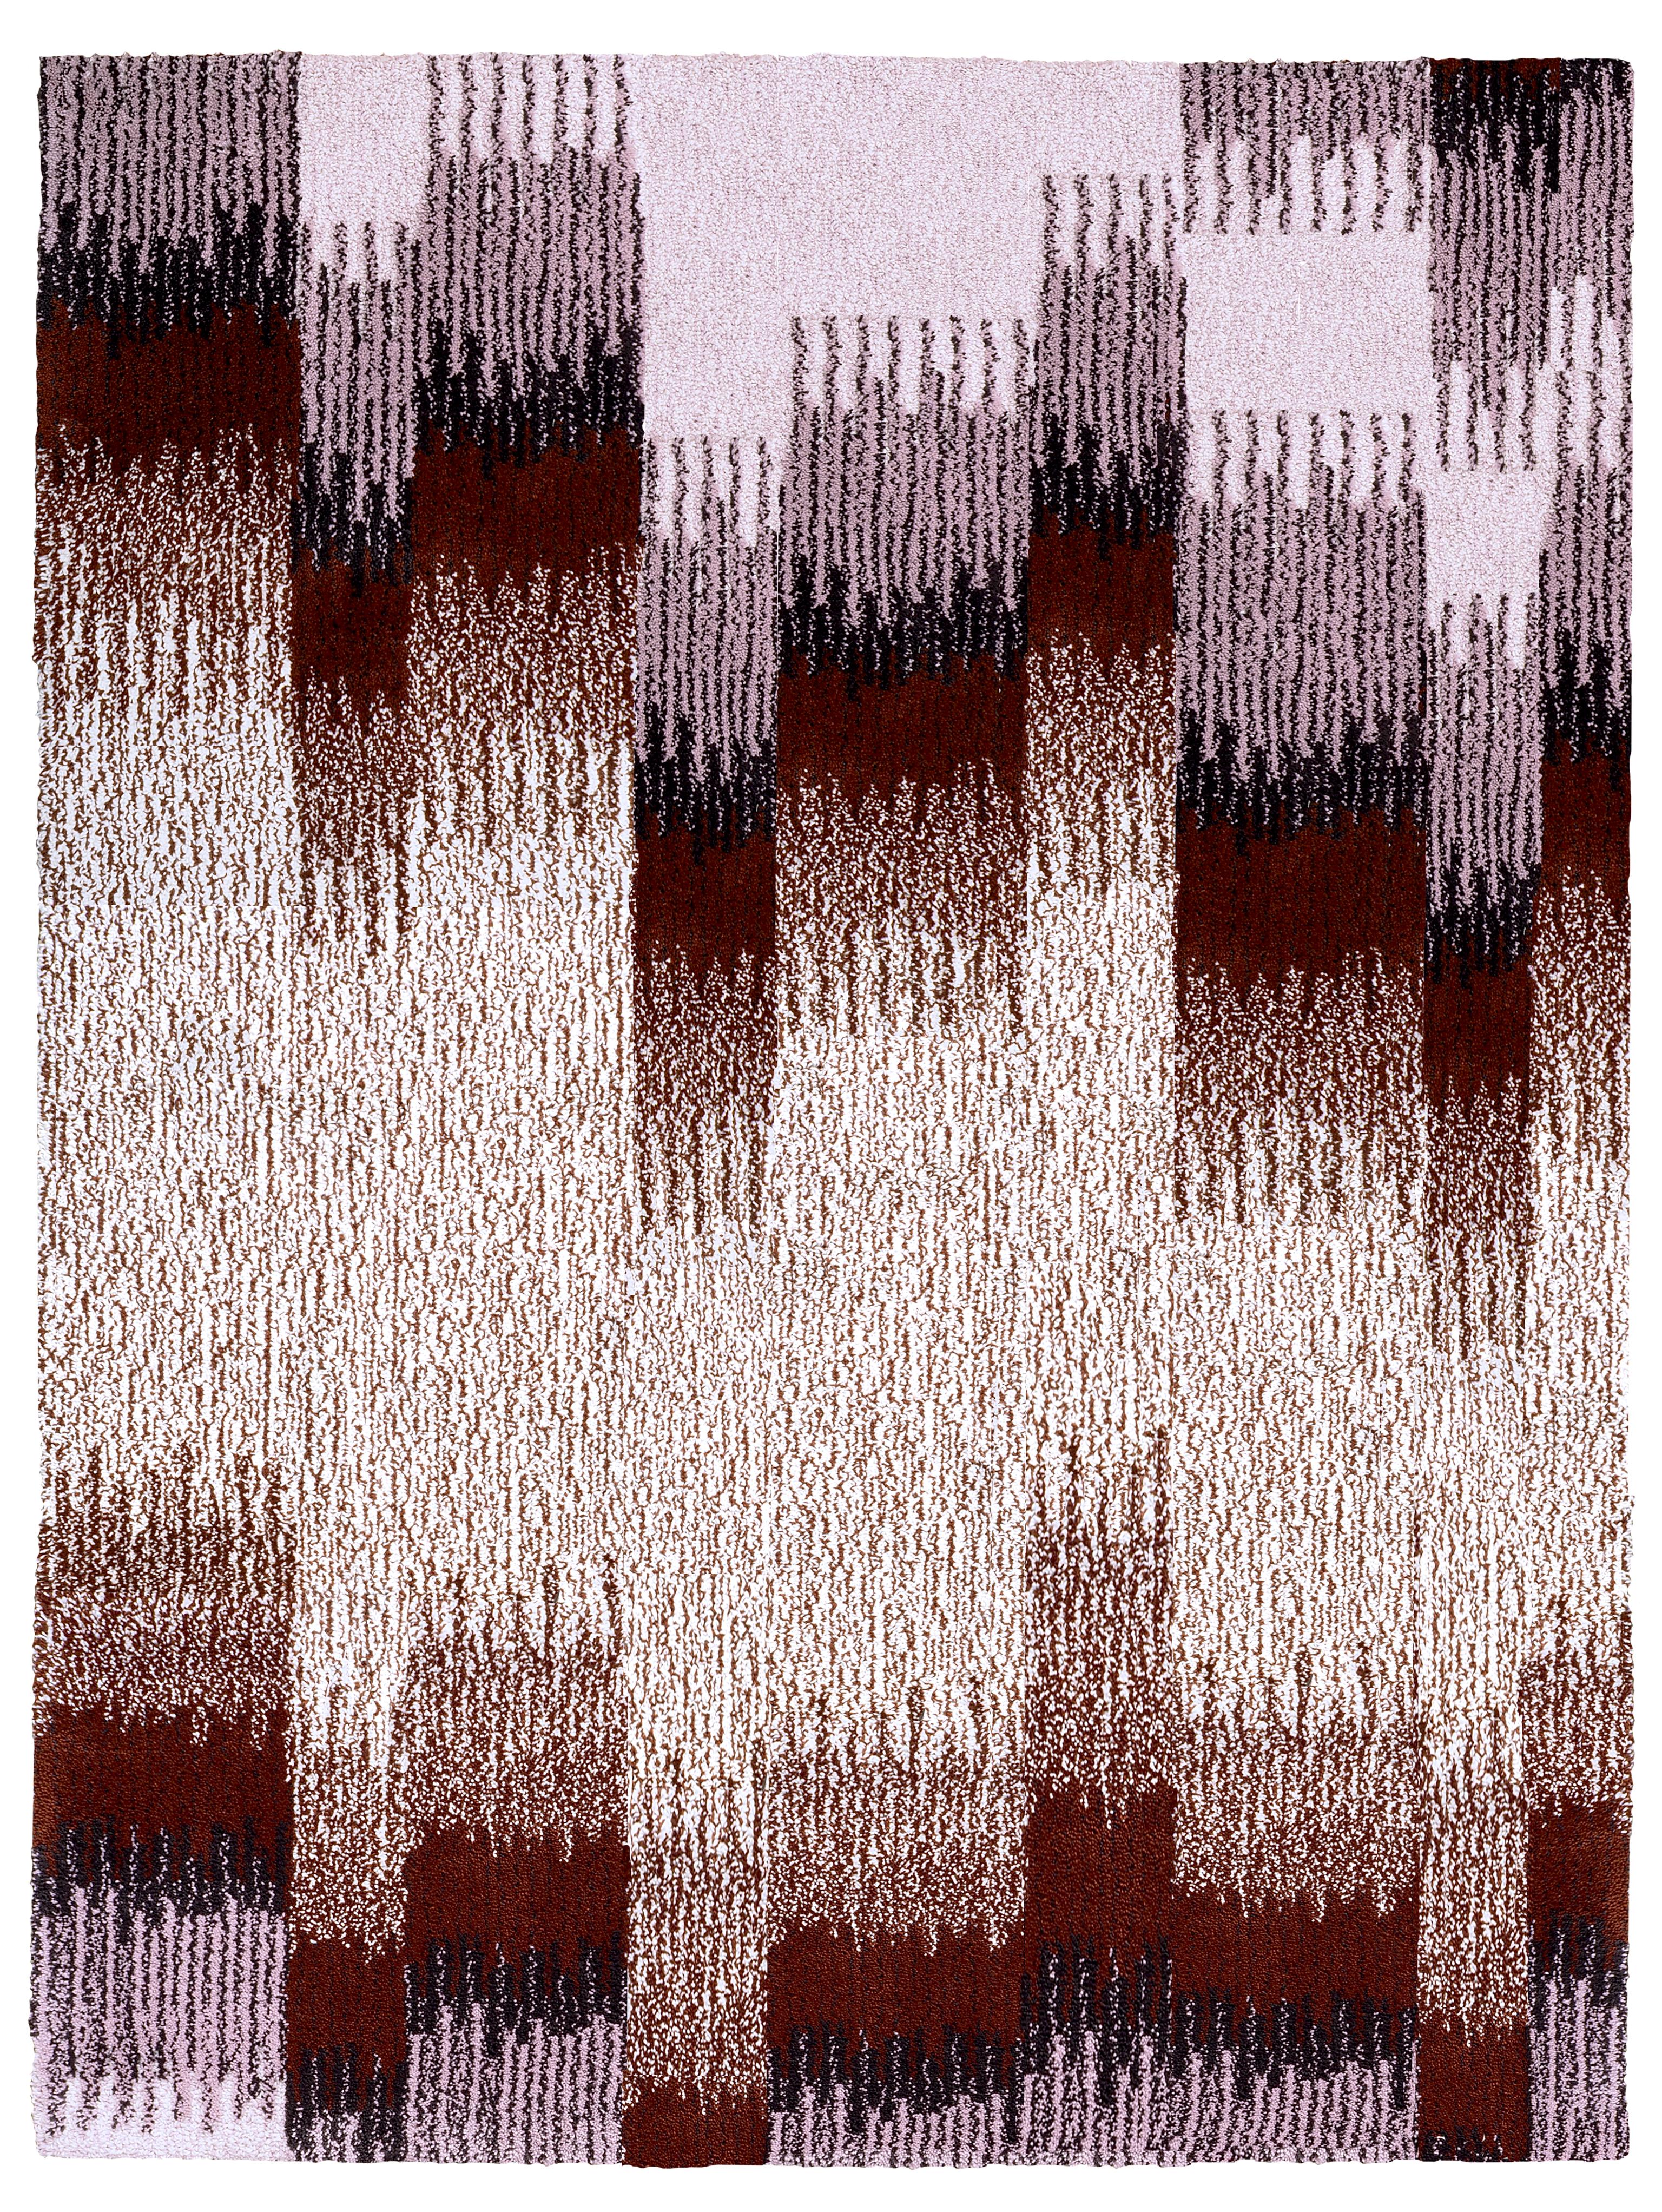 Hand-Crafted Mustard Epoca Uno Rug by Alissa and Nienke Studio For Sale